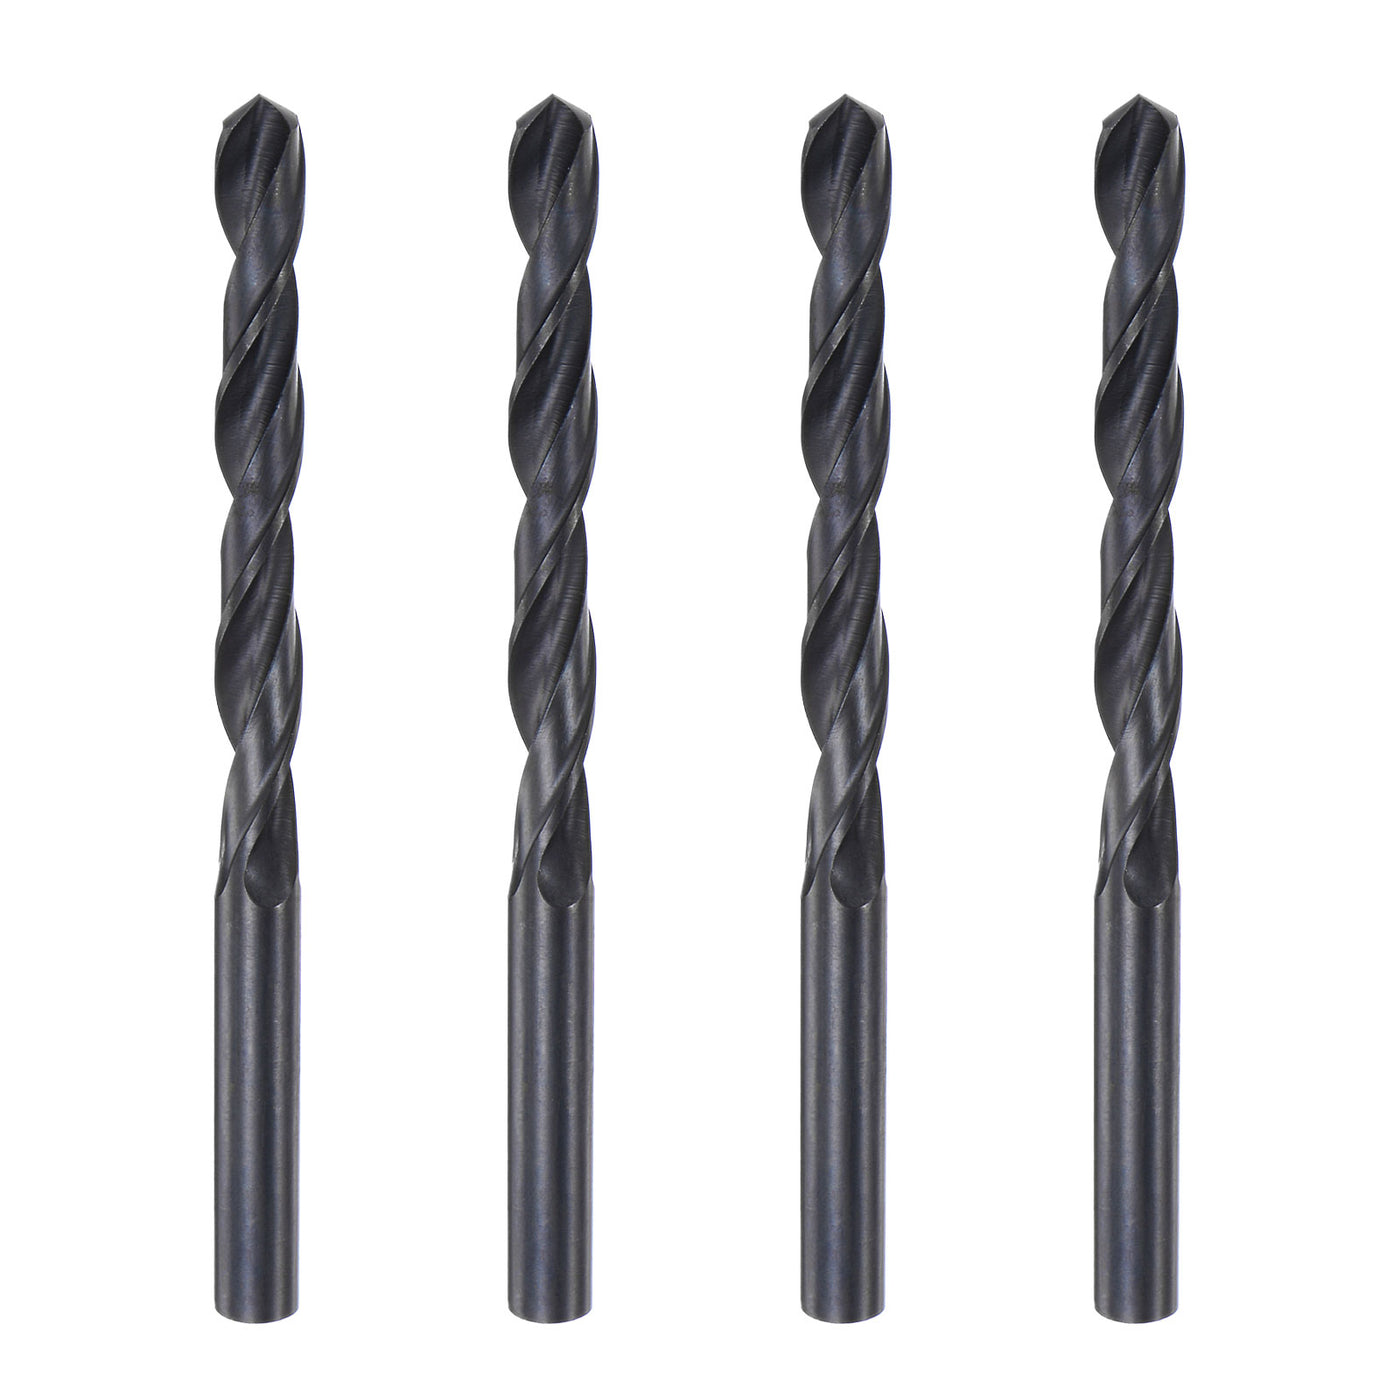 uxcell Uxcell High Speed Steel Twist Drill Bit, 7.6mm Fully Ground Black Oxide 110mm Long 4Pcs